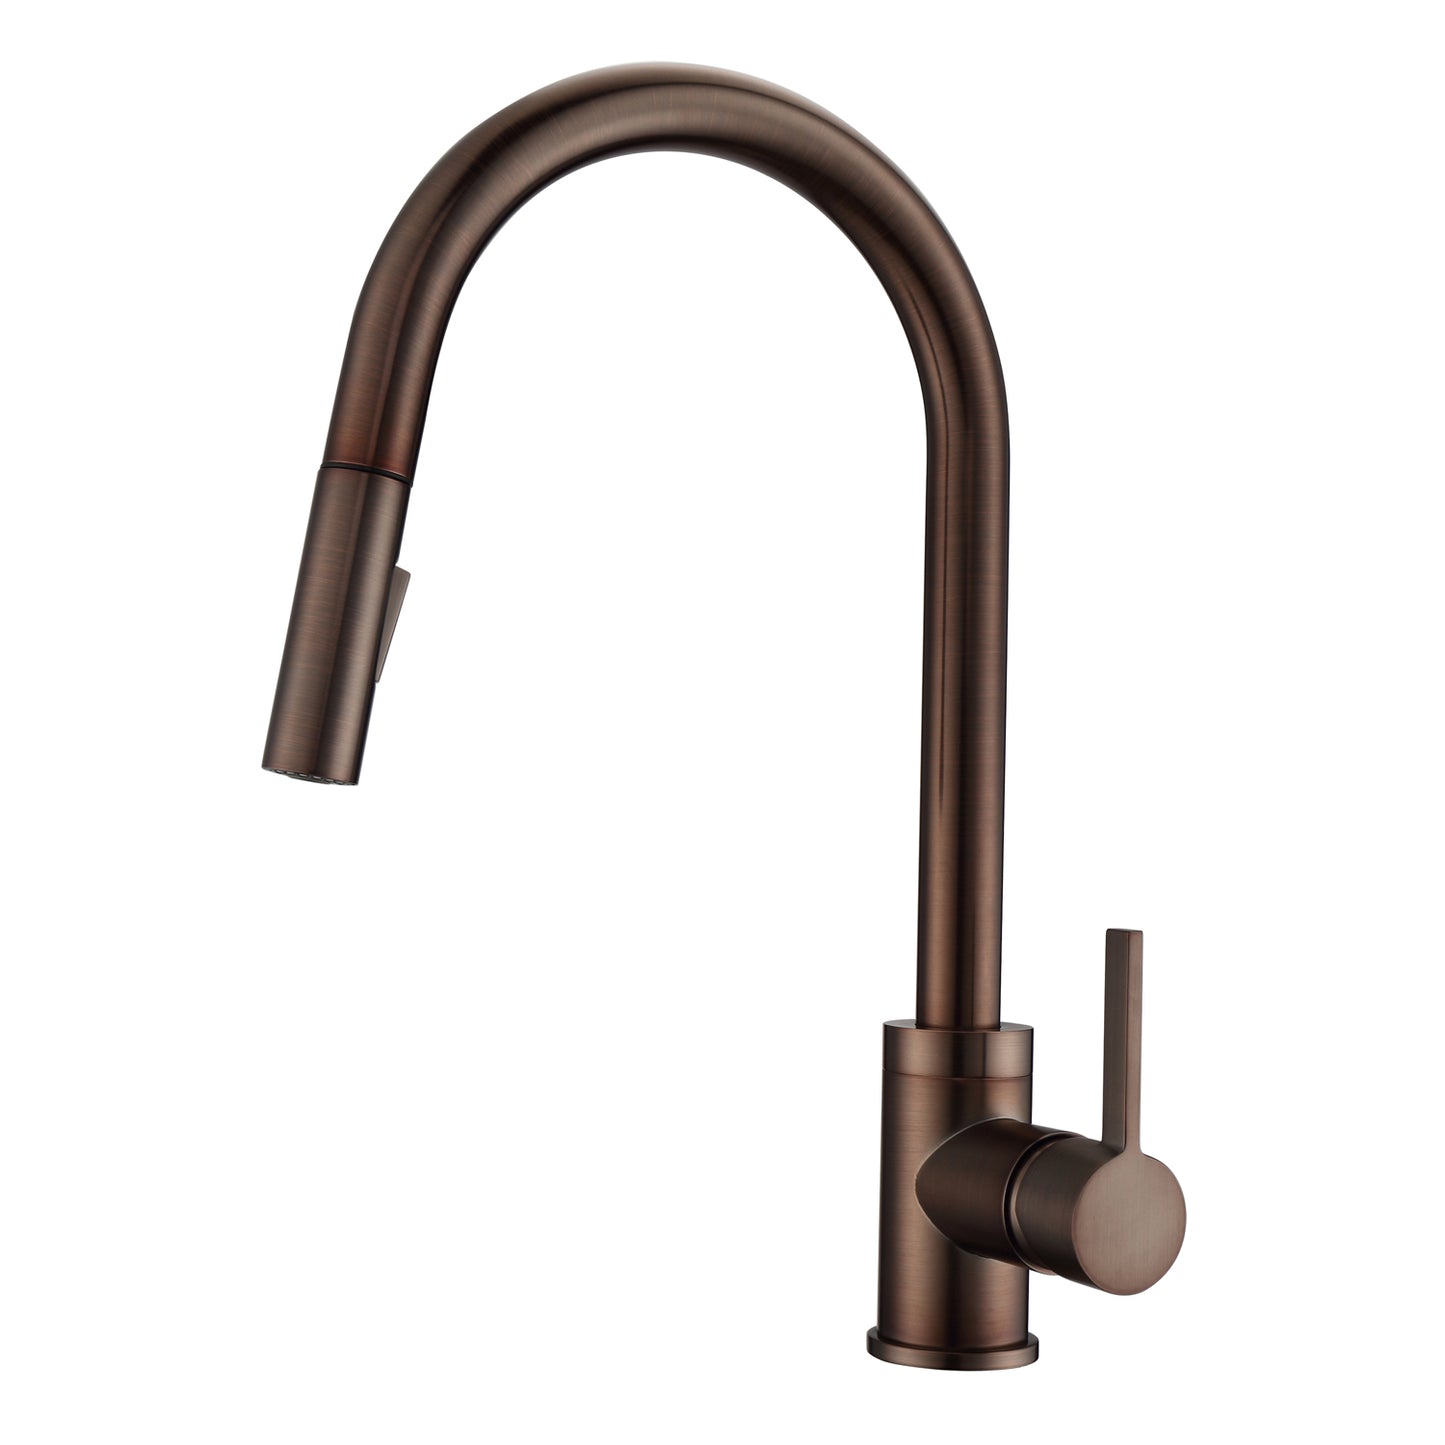 Fenton 1 Kitchen Faucet, Pull-Out Sprayer, Single Lever Handle, Oil Rubbed Bronze